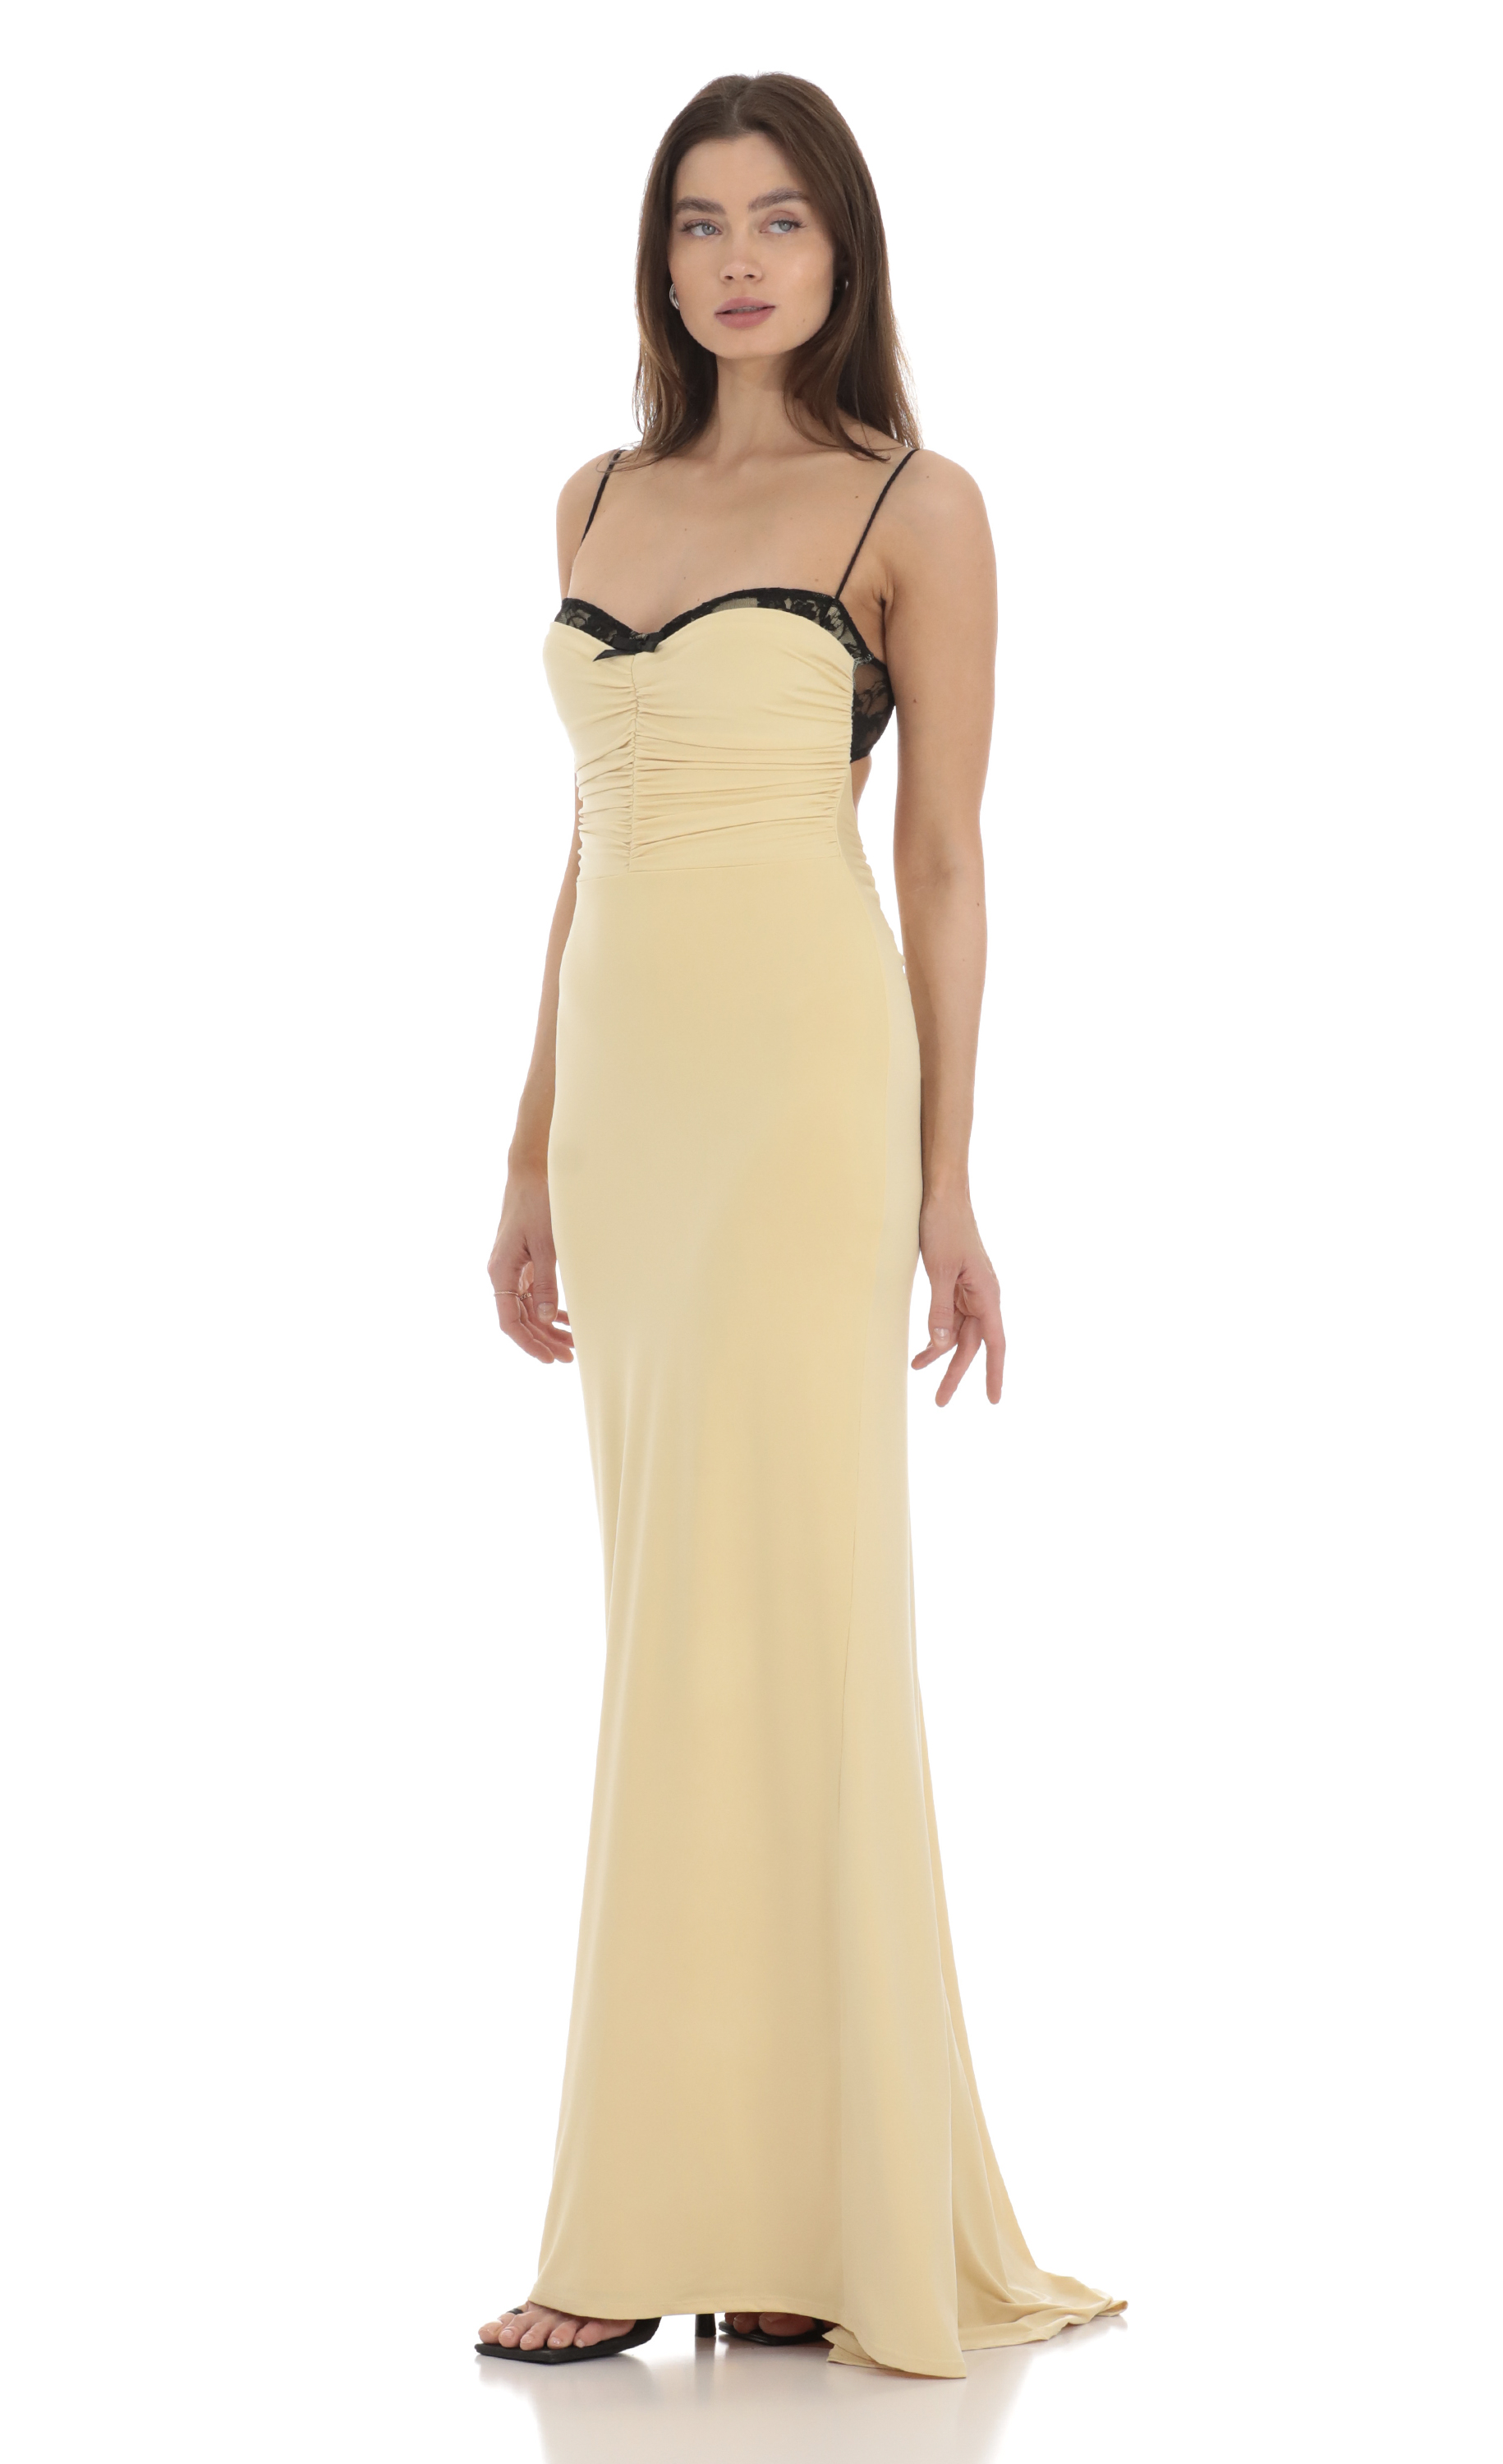 Lace Bust Open Back Maxi Dress in Yellow